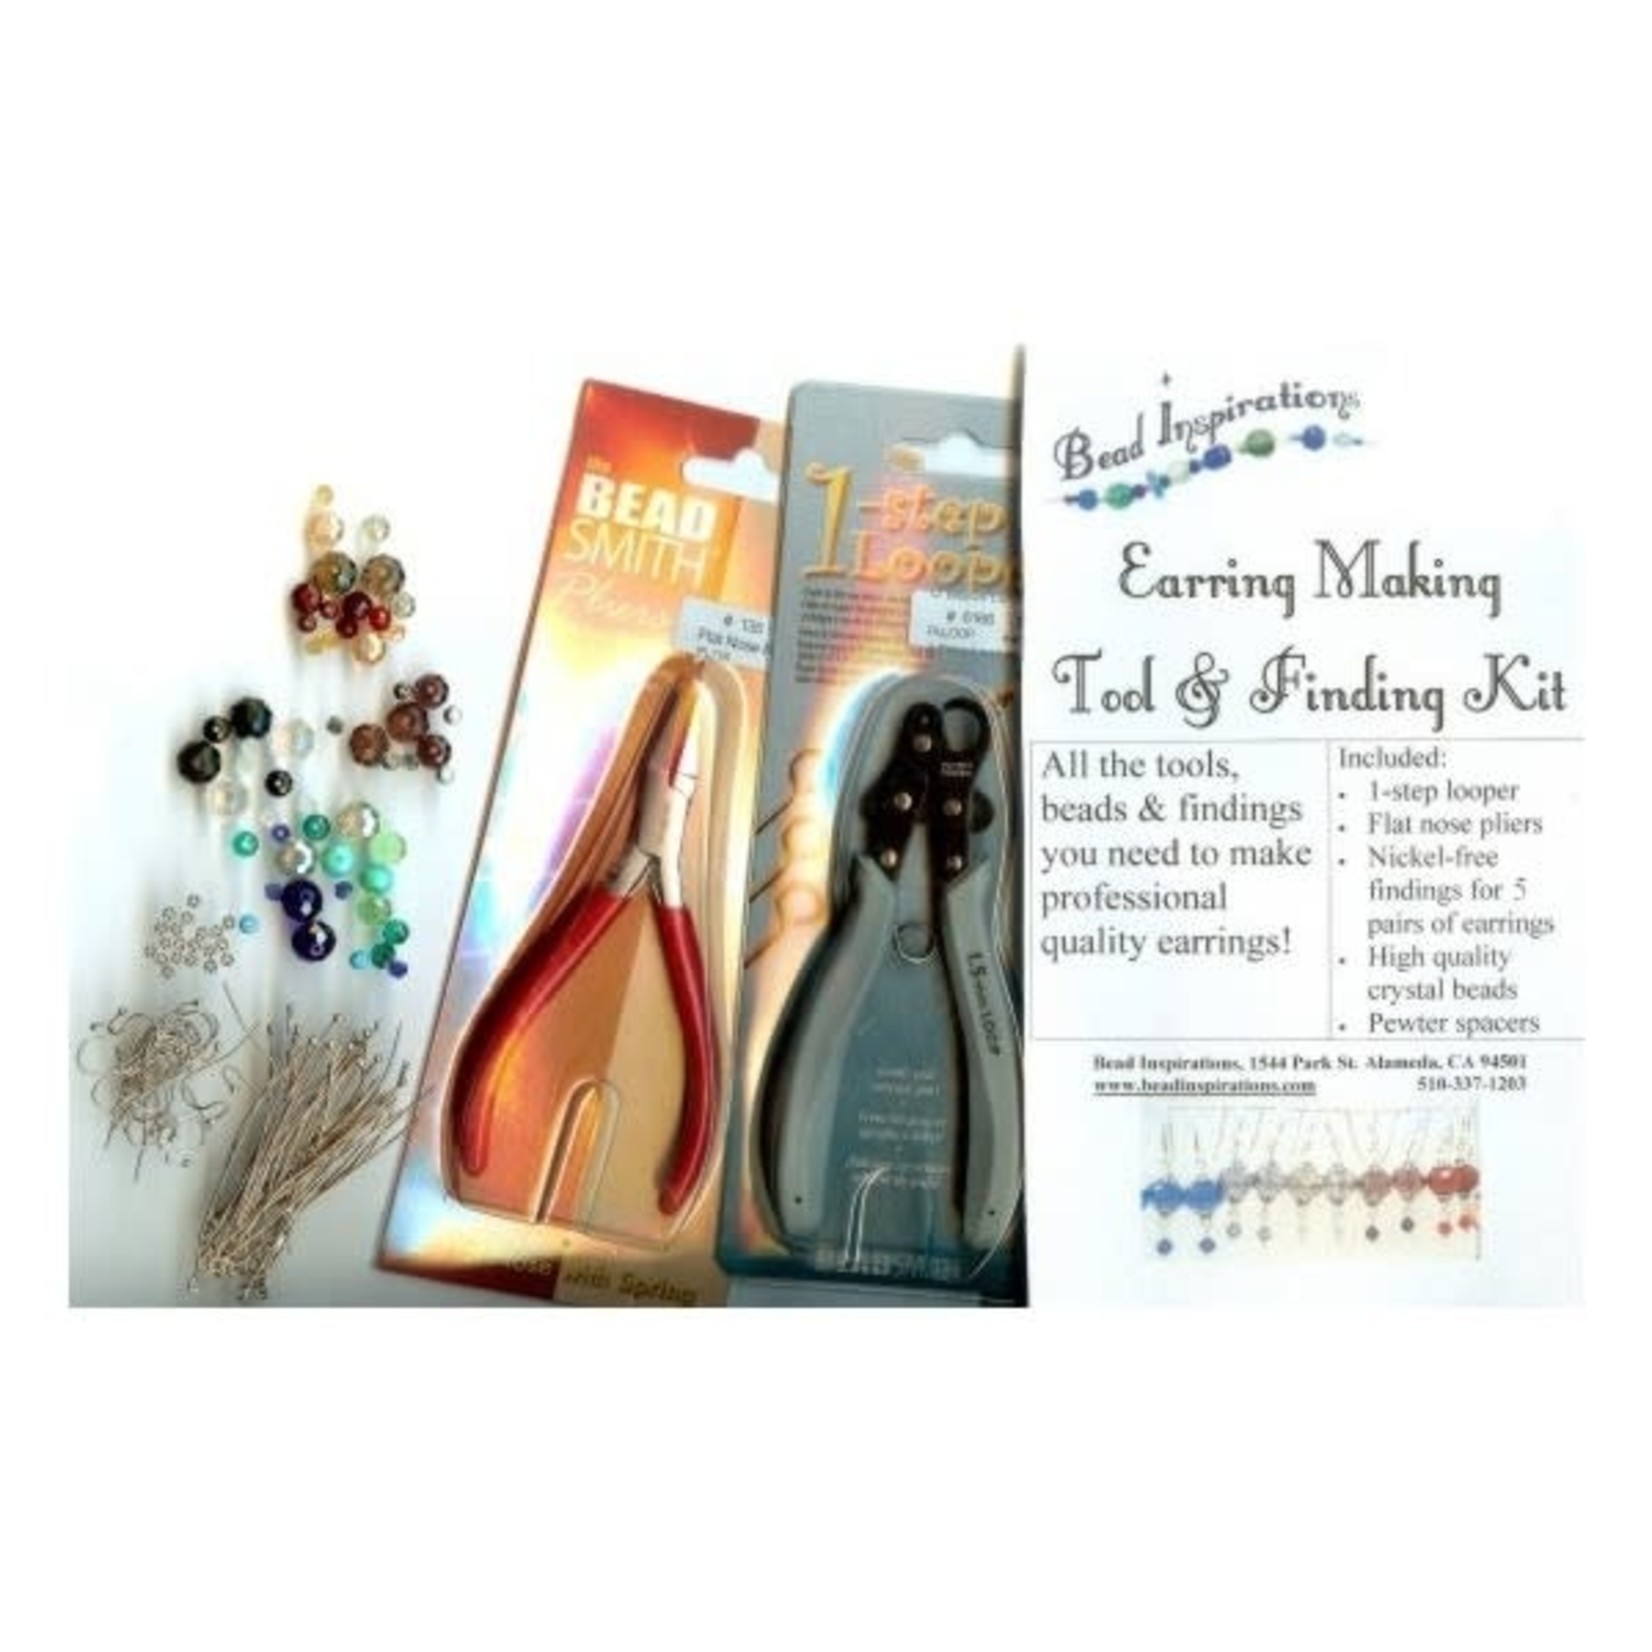 Earring Making Tool and Finding Kit